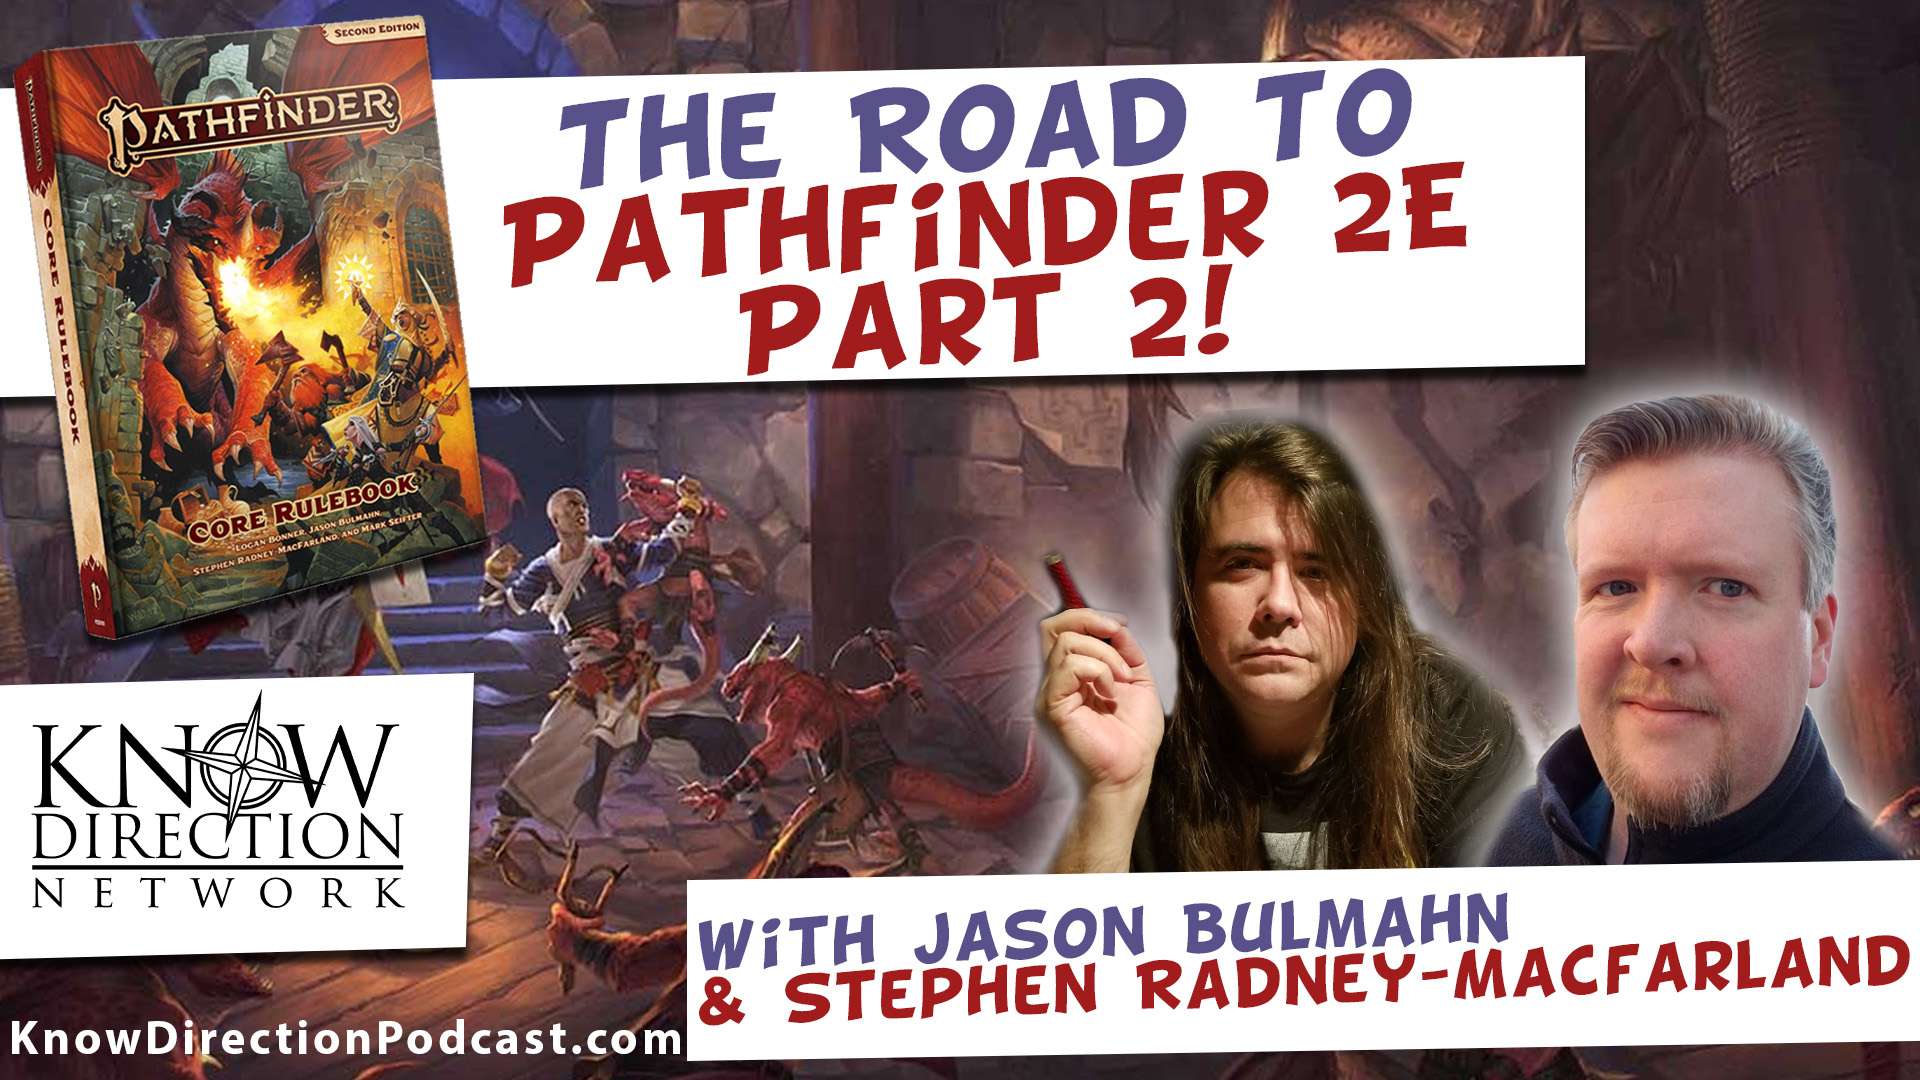 The Road to Pathfinder 2e part 2 with Jason Bulmahn and Stephen Radney-Macfraland